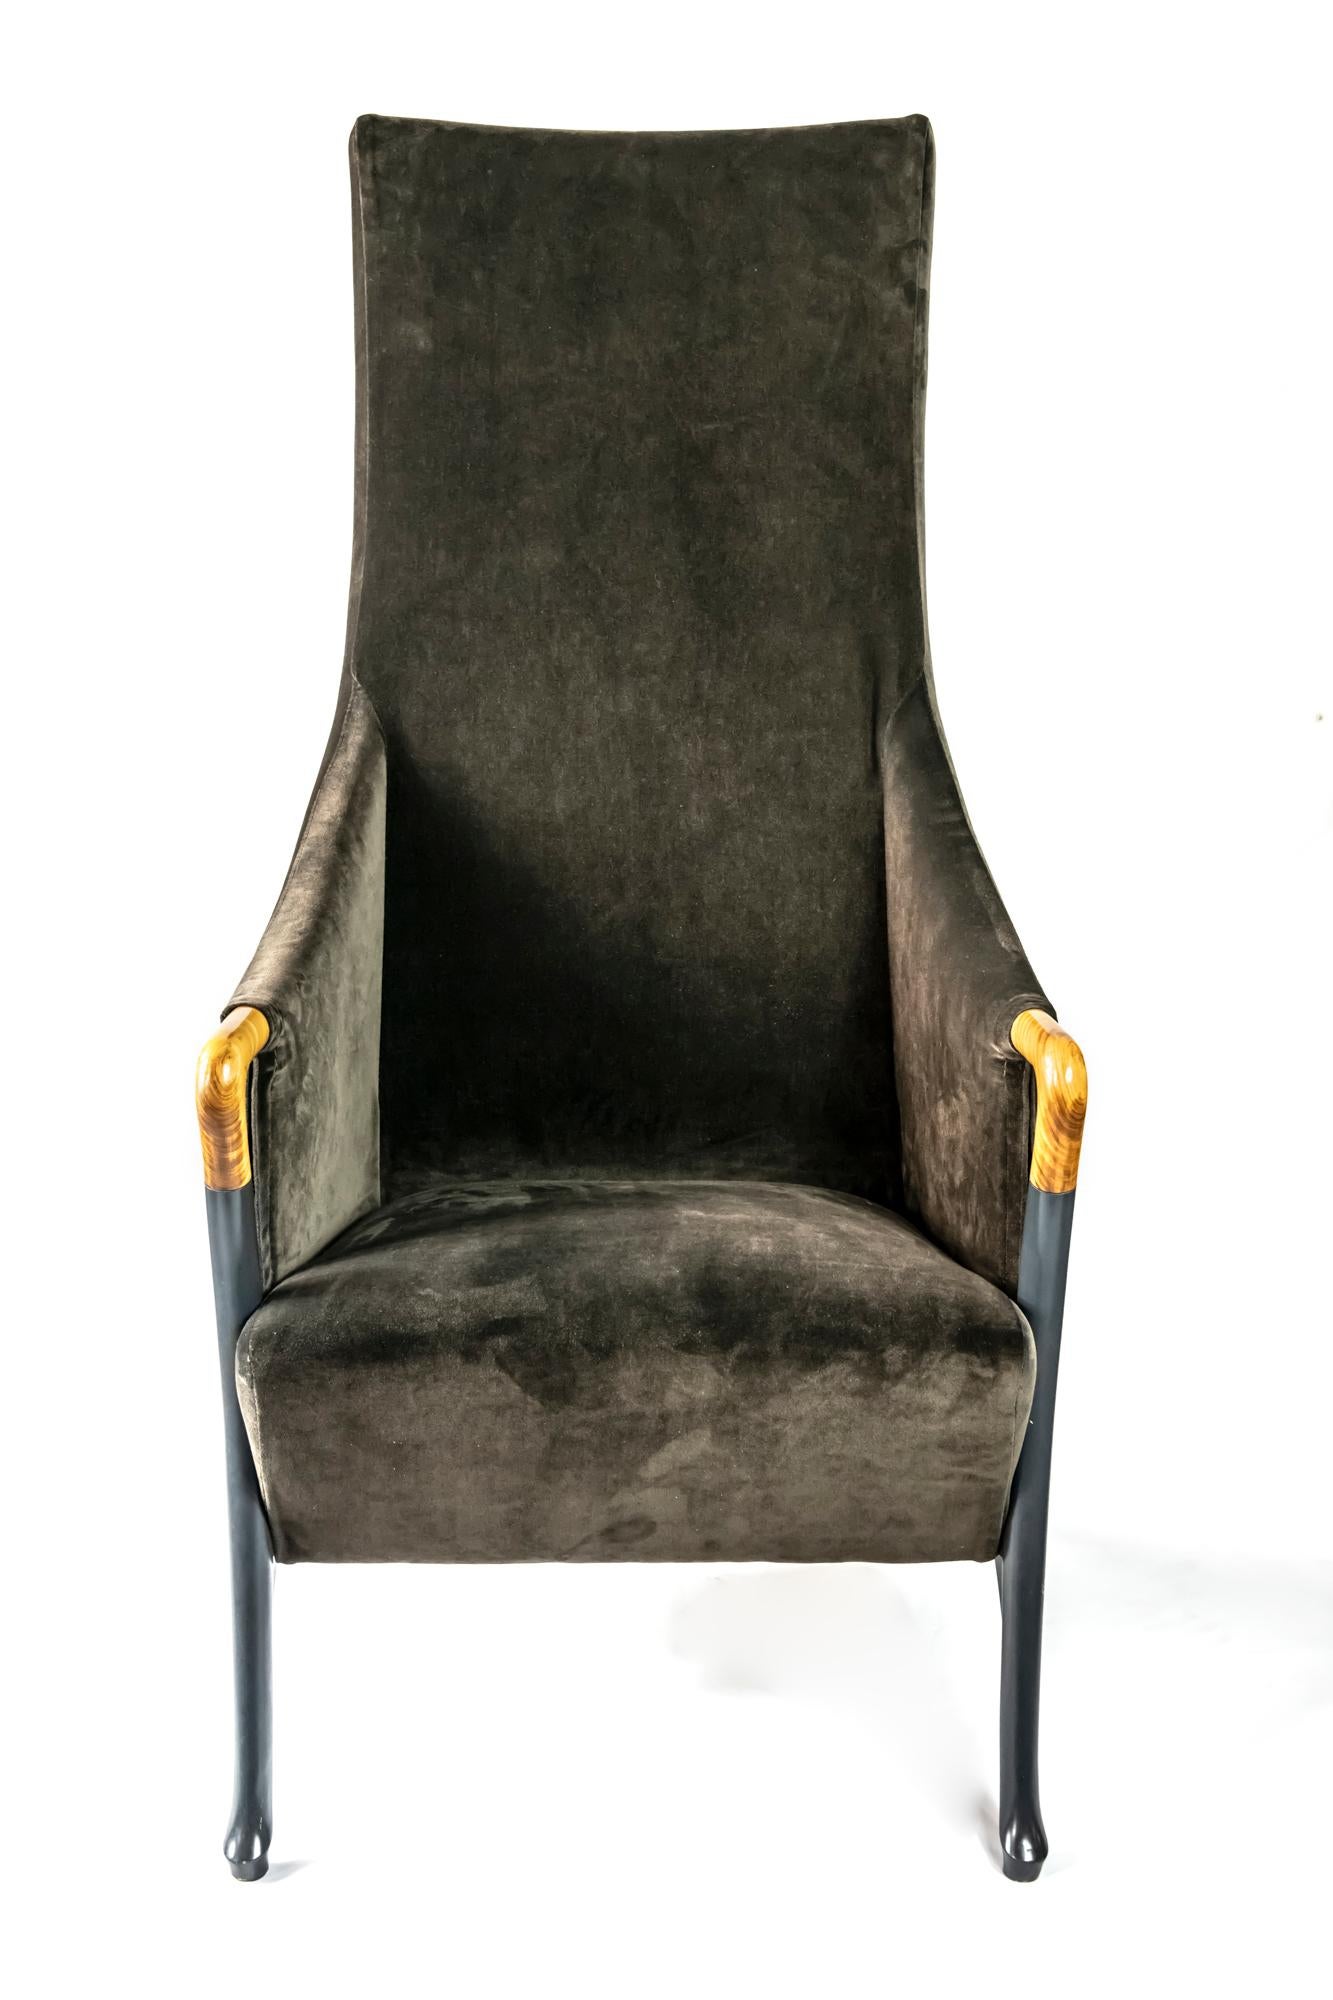 Pair of Italian armchairs by Giorgetti. The wooden base is partly colored in dark grey-brown colour. Upholsted with quality dark brown velour.